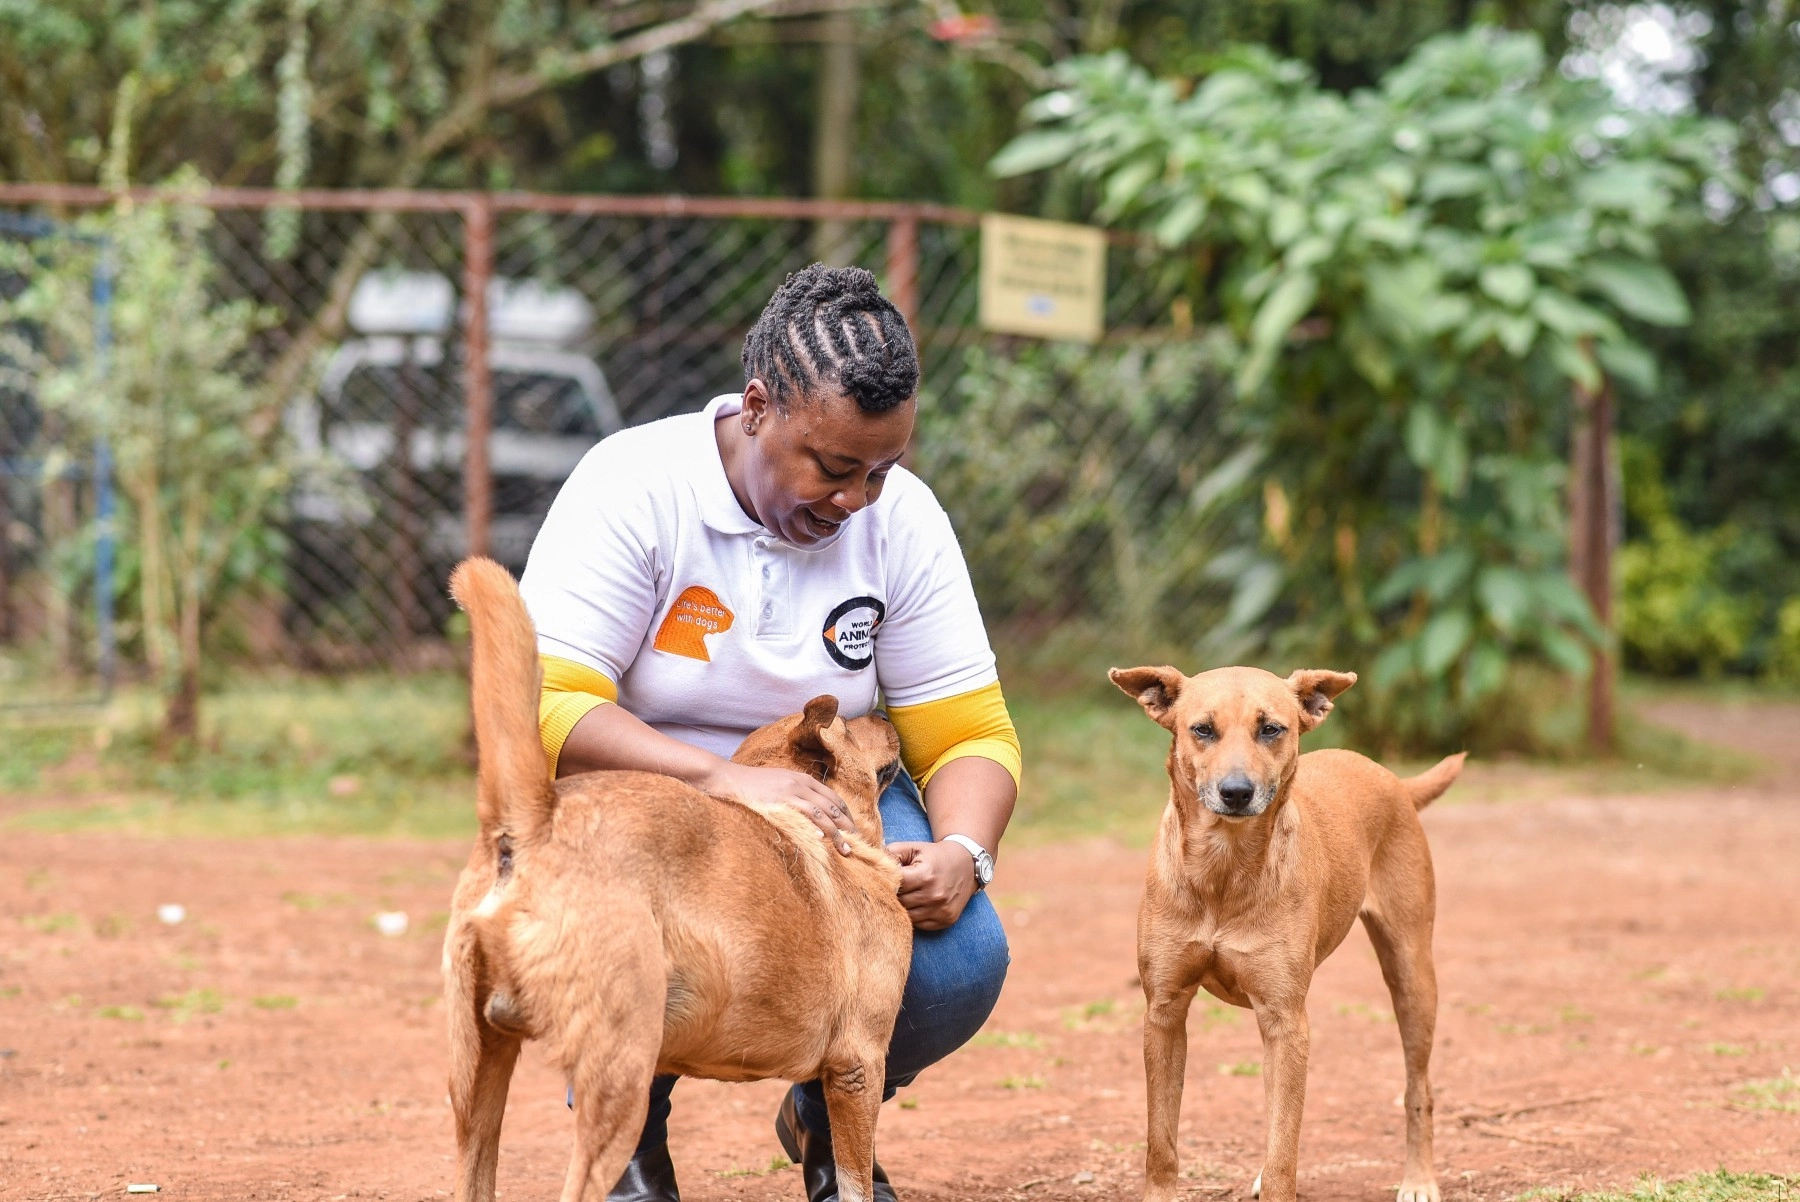 World Animal Protection staff looking over two dogs